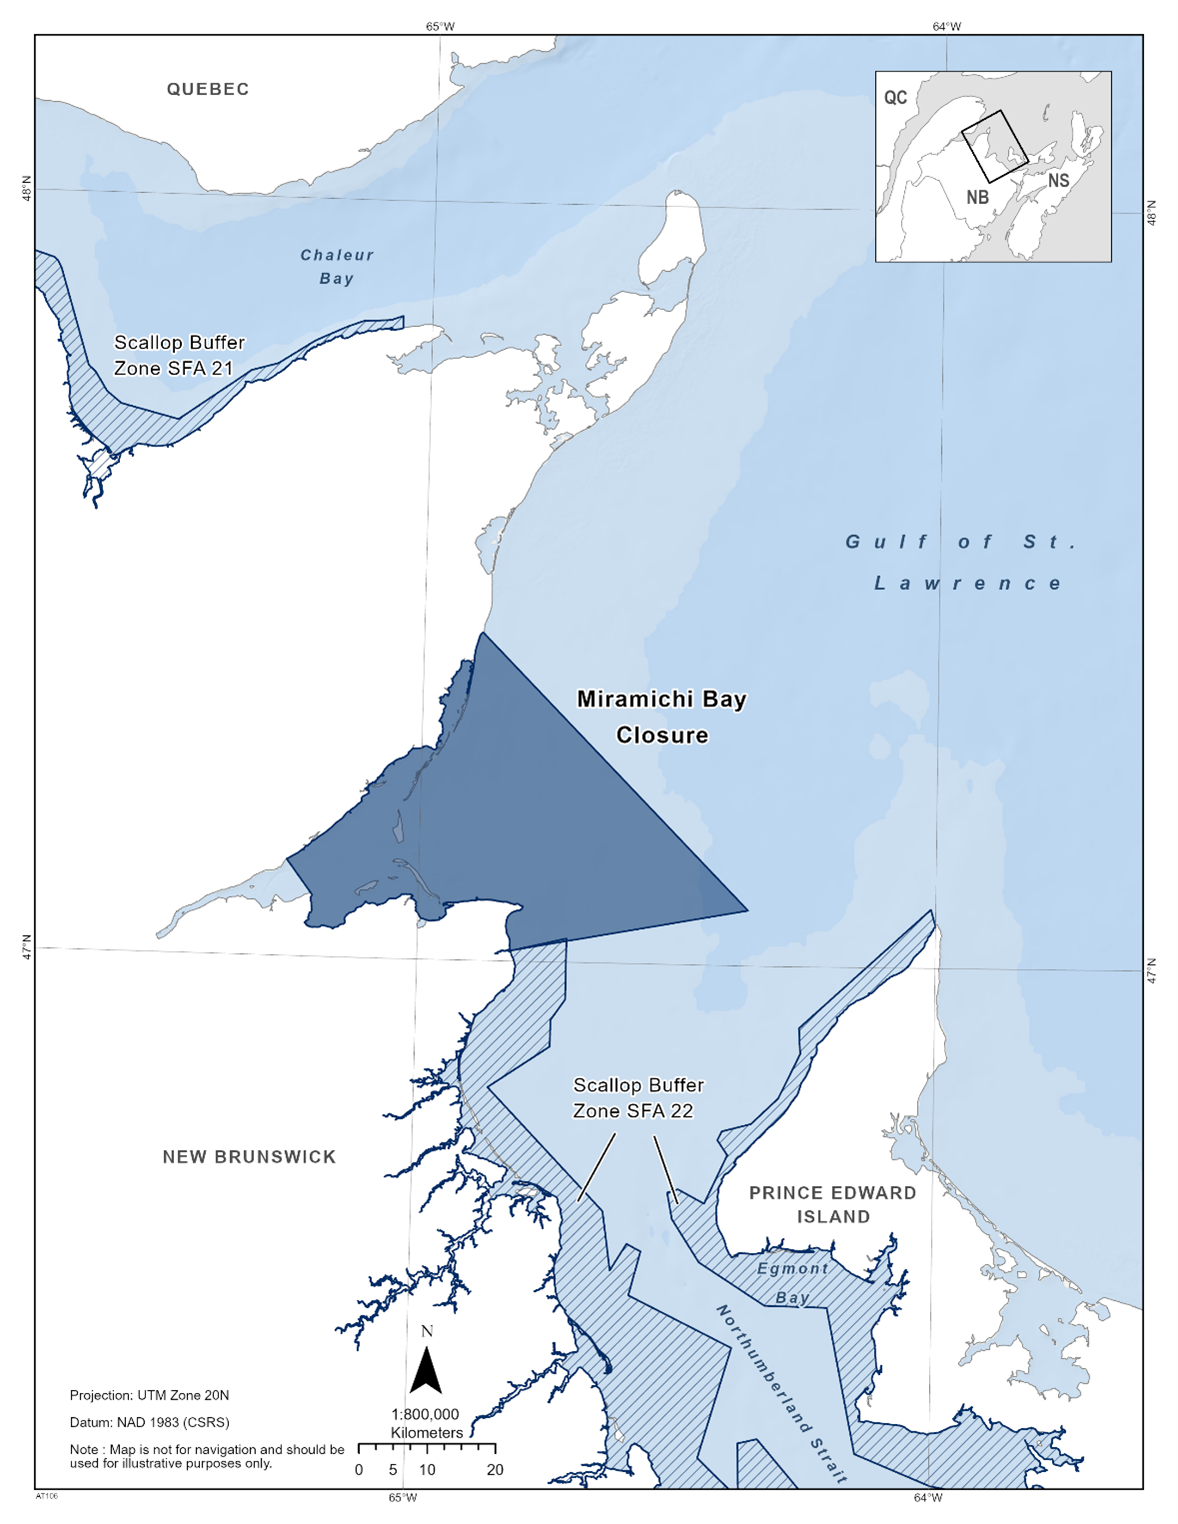 Map of the Miramichi Bay Closure depicted in dark blue. The map also features the marine refuges nearby with dark blue diagonal lines (Scallop Buffer Zone SFA 21 & SFA 22).